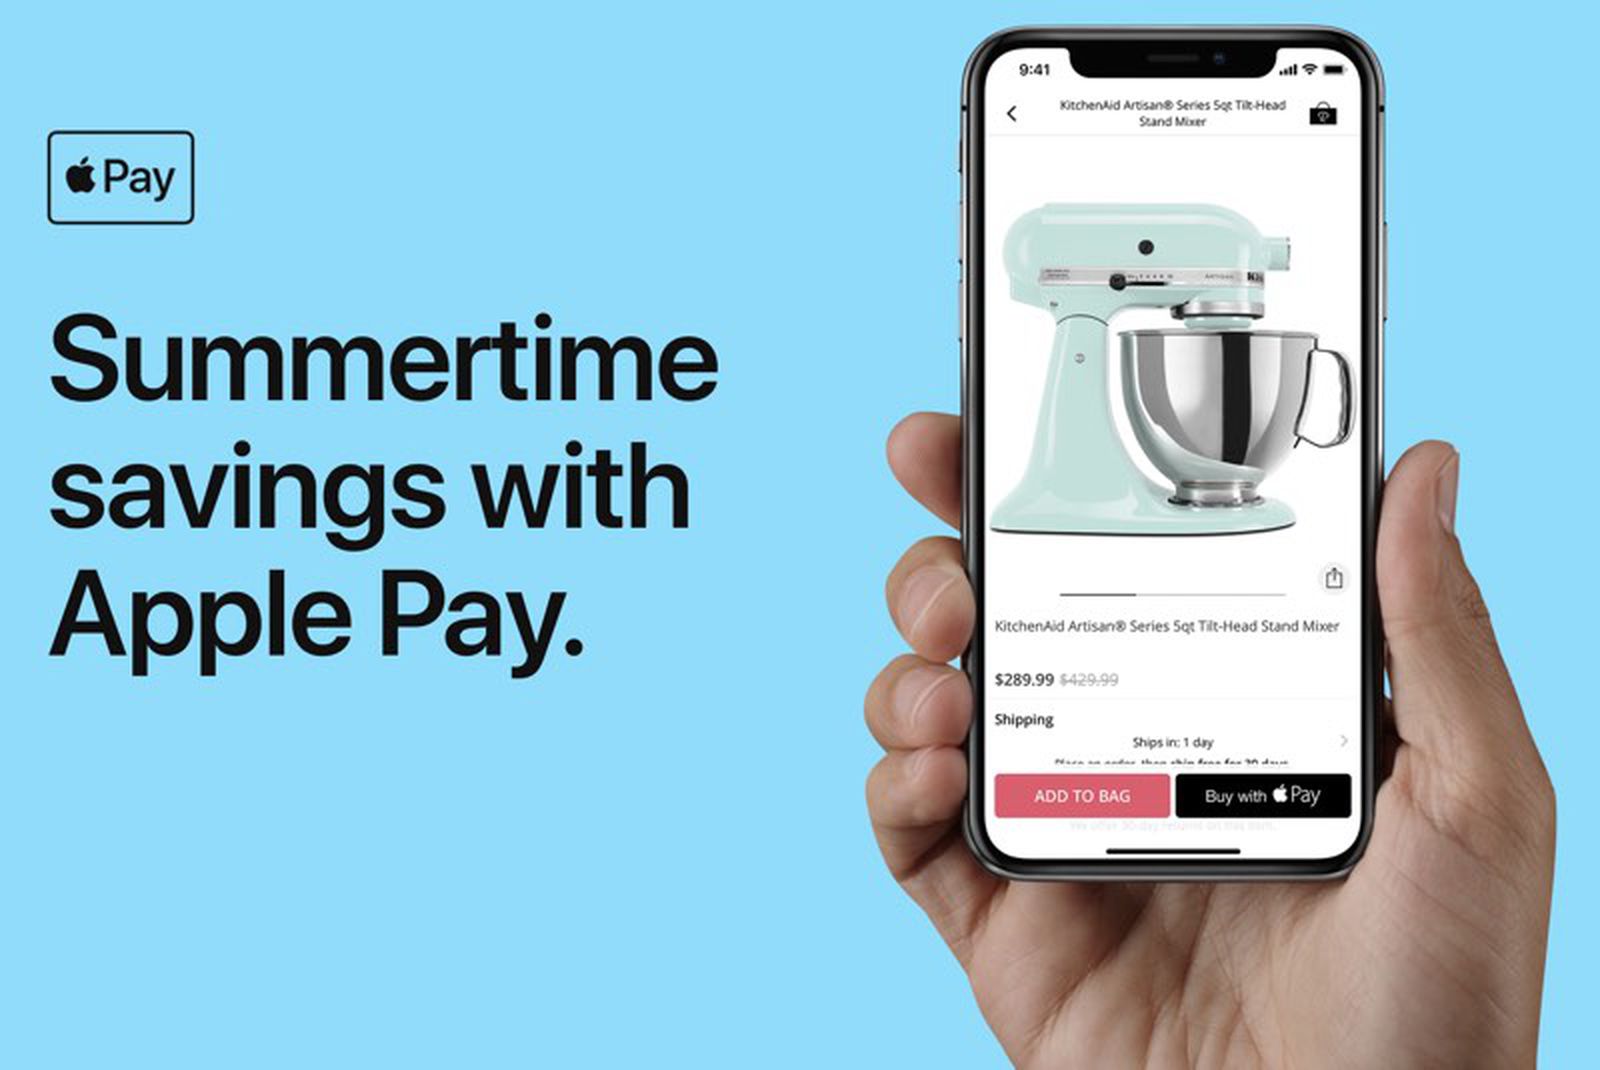 apple-launches-new-summertime-savings-apple-pay-promotion-macrumors